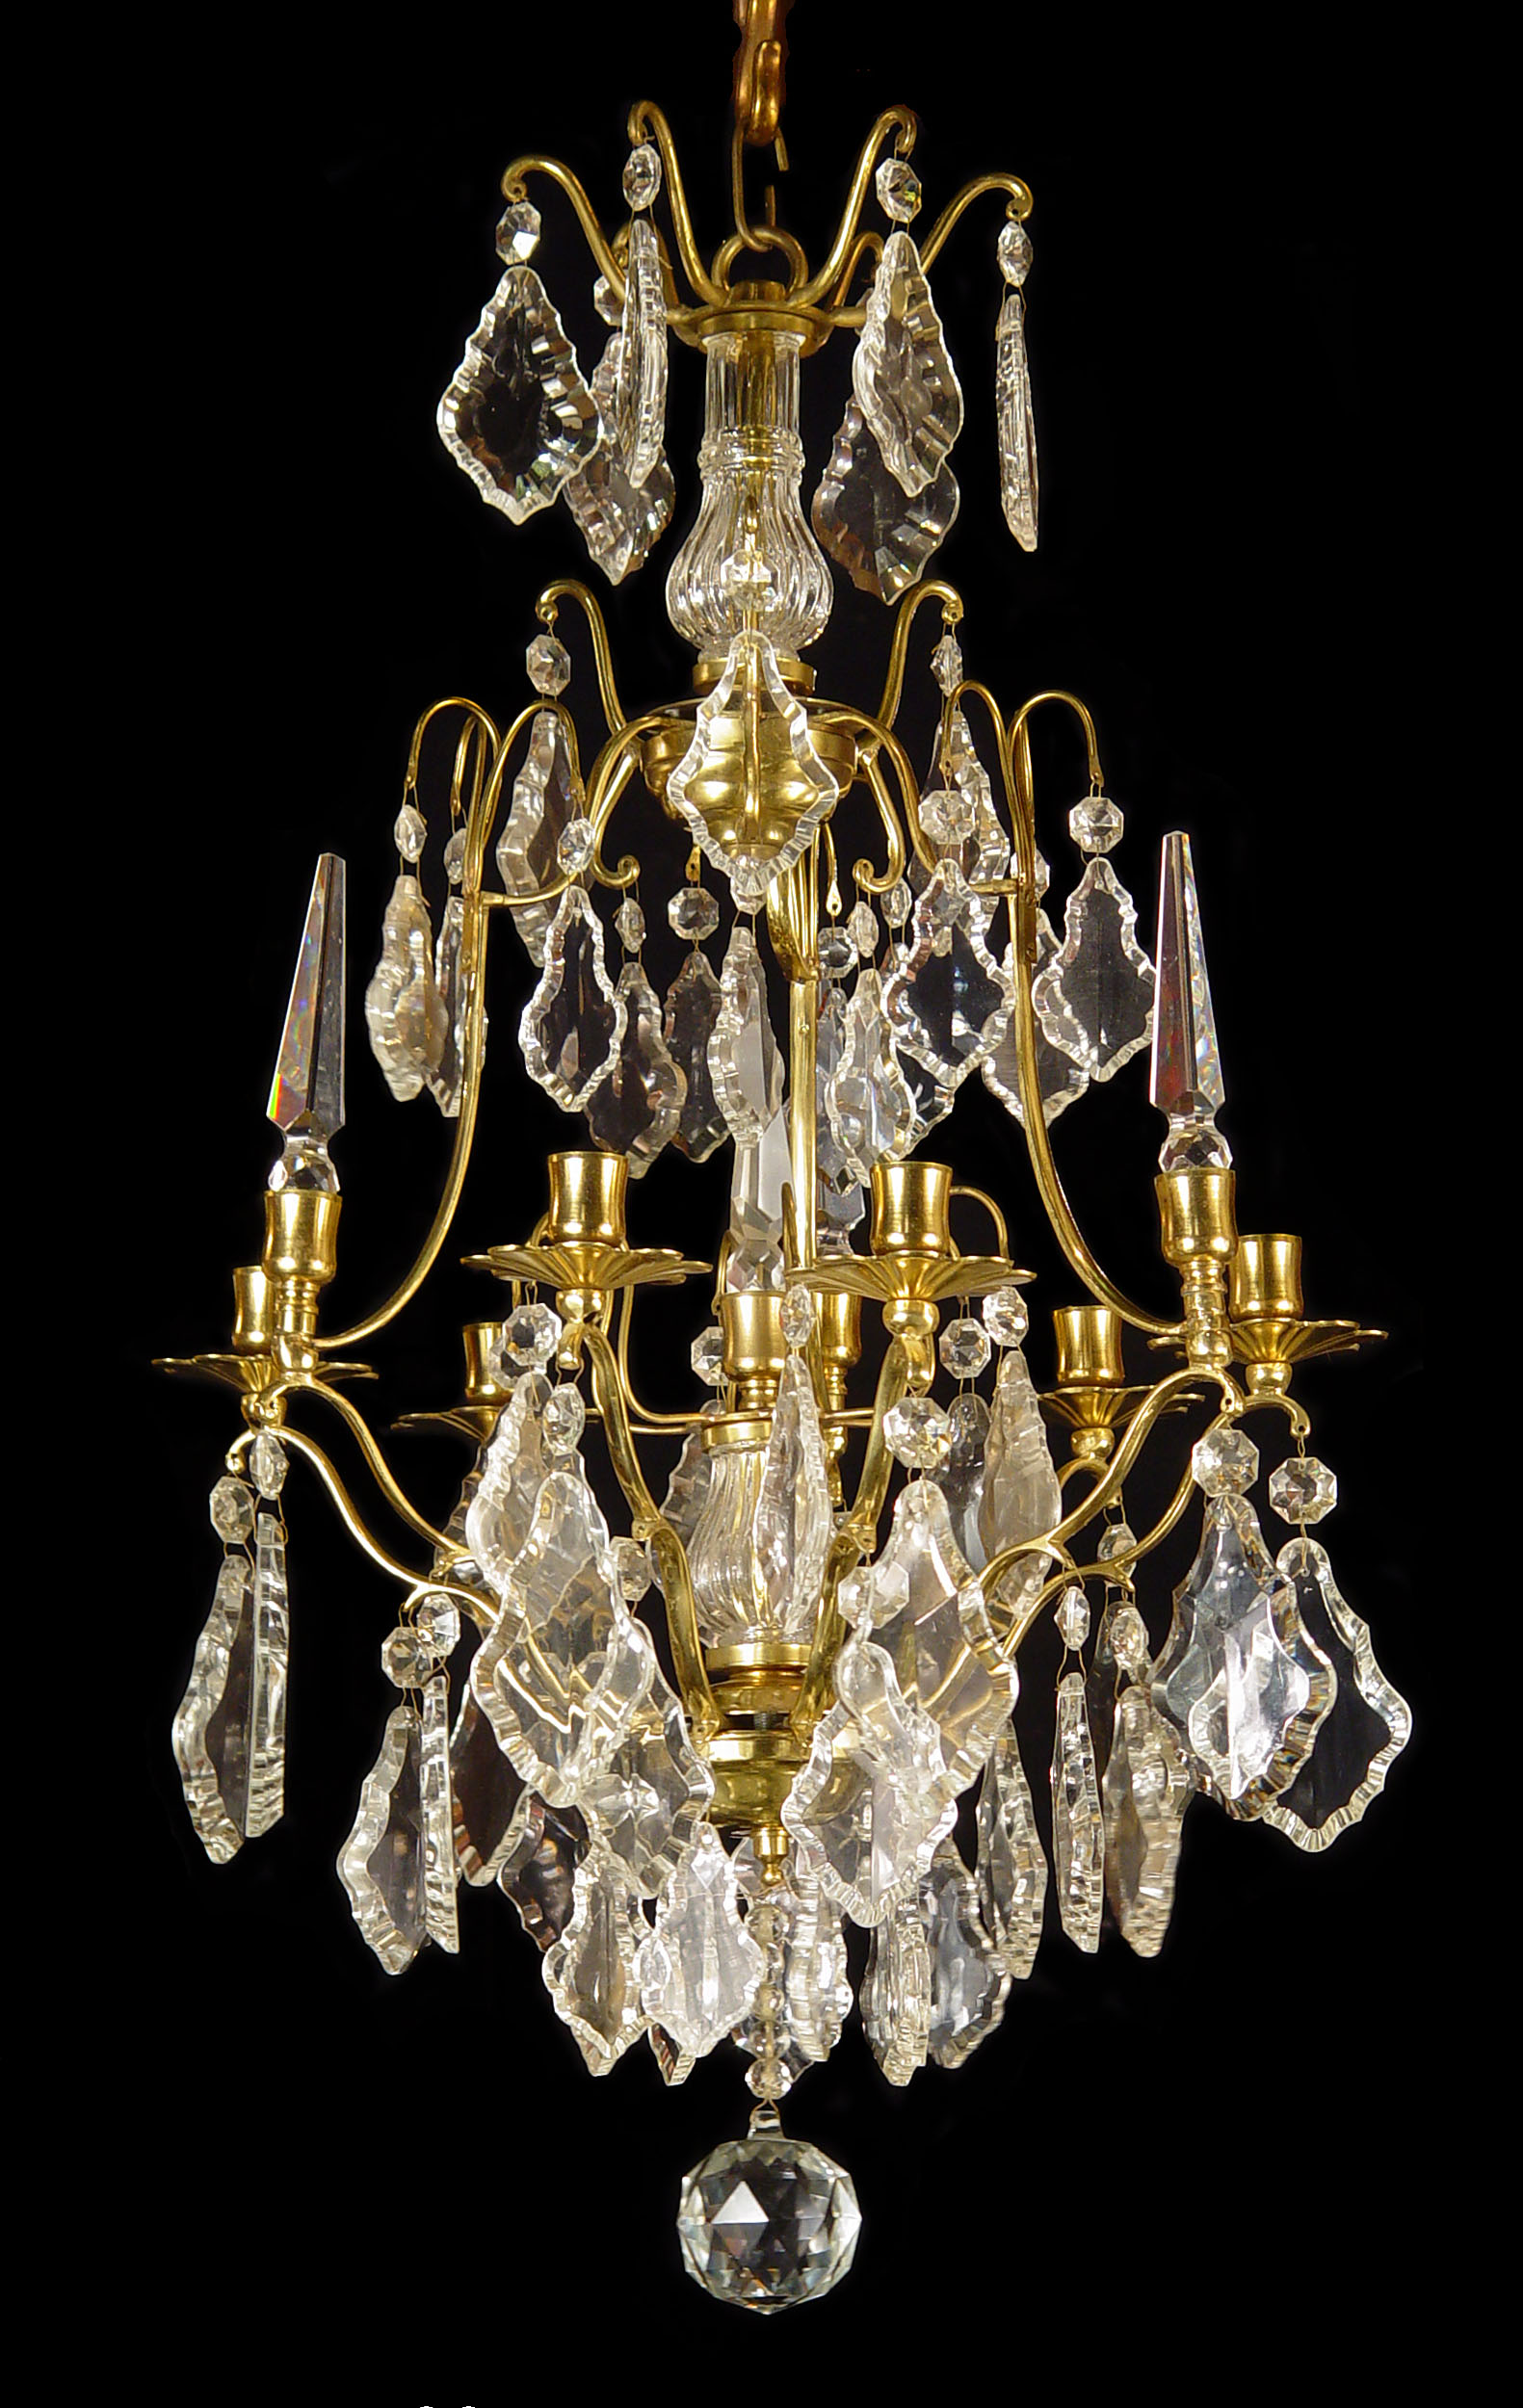 A 20th Century Five Light Crystal Chandelier